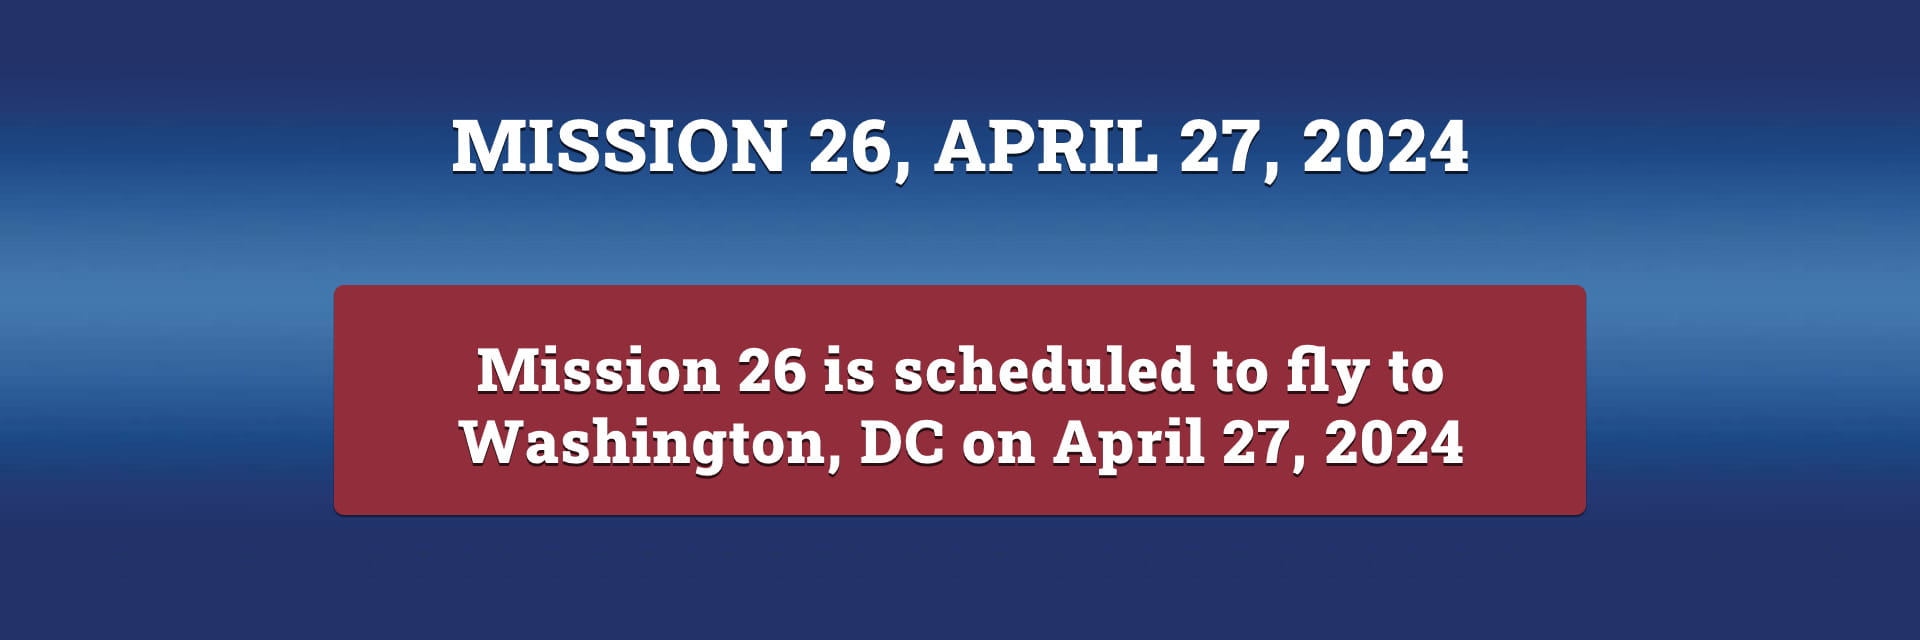 Mission 26 is scheduled to fly to Washington DC on April 27, 2024